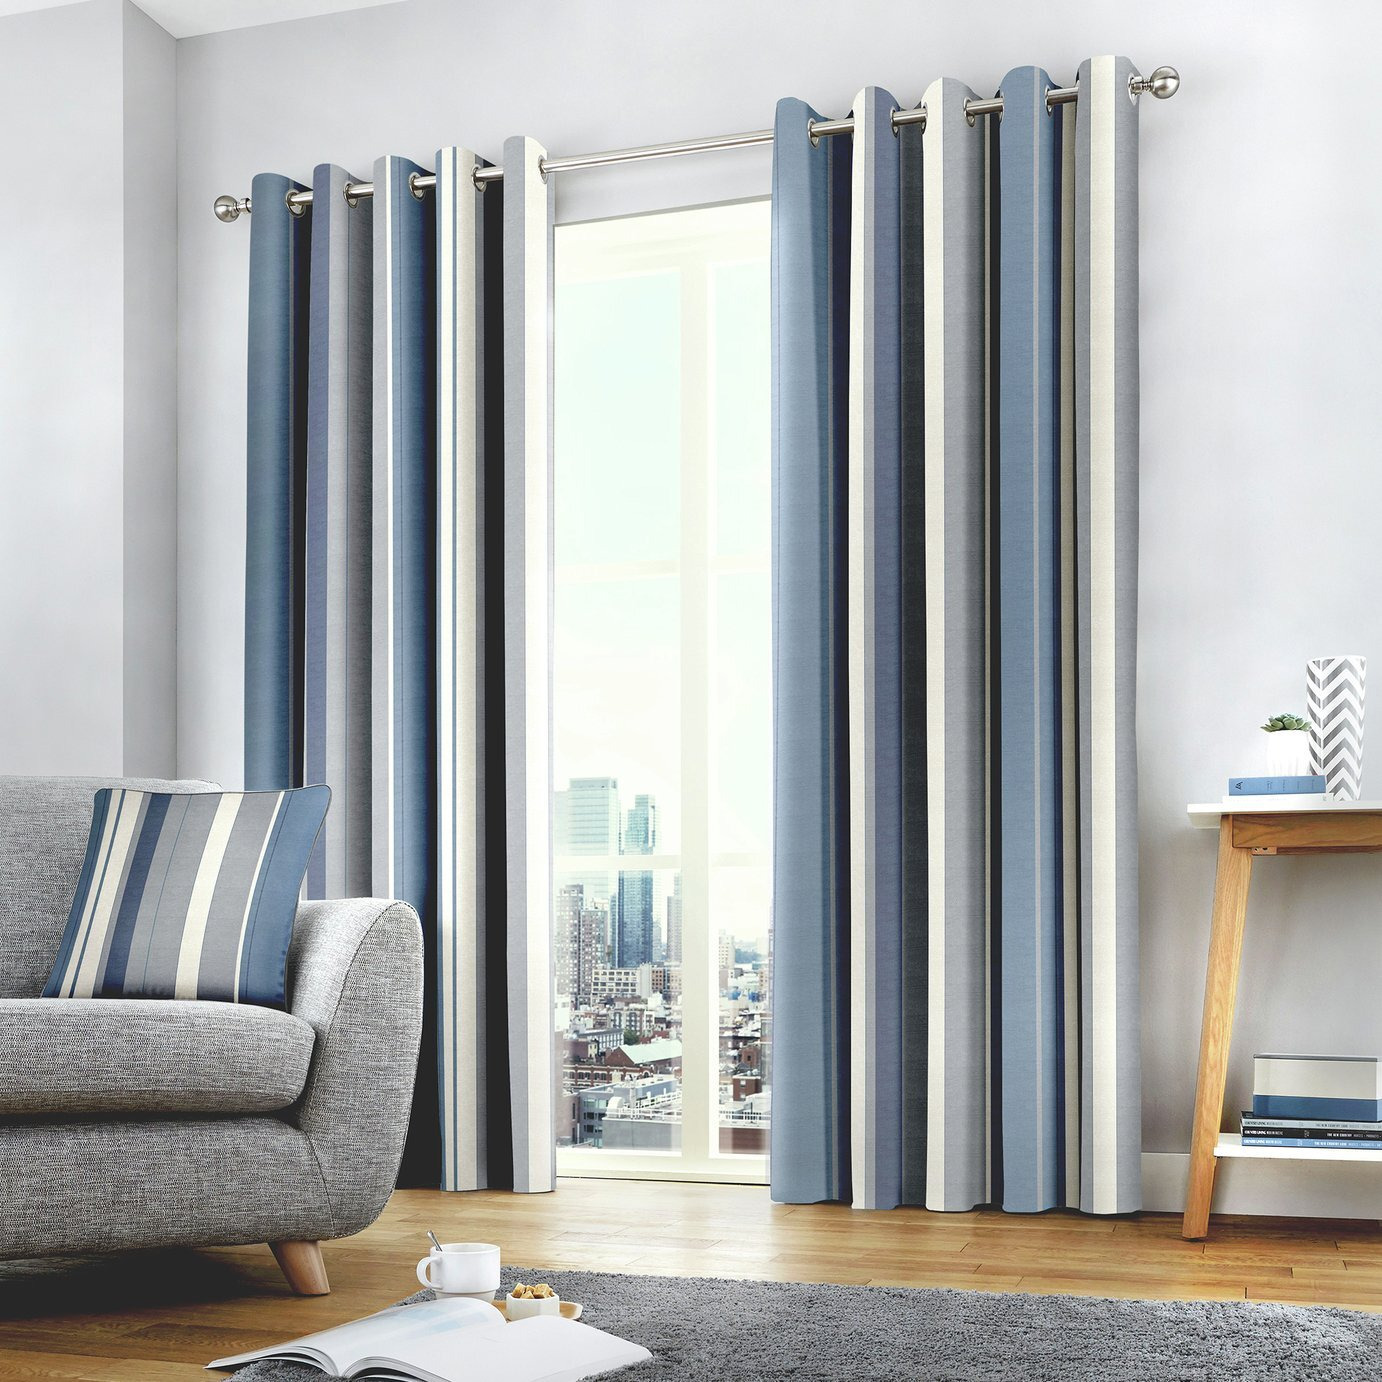 Fusion Whitworth striped Fully Lined Eyelet Curtains - Blue - image 1